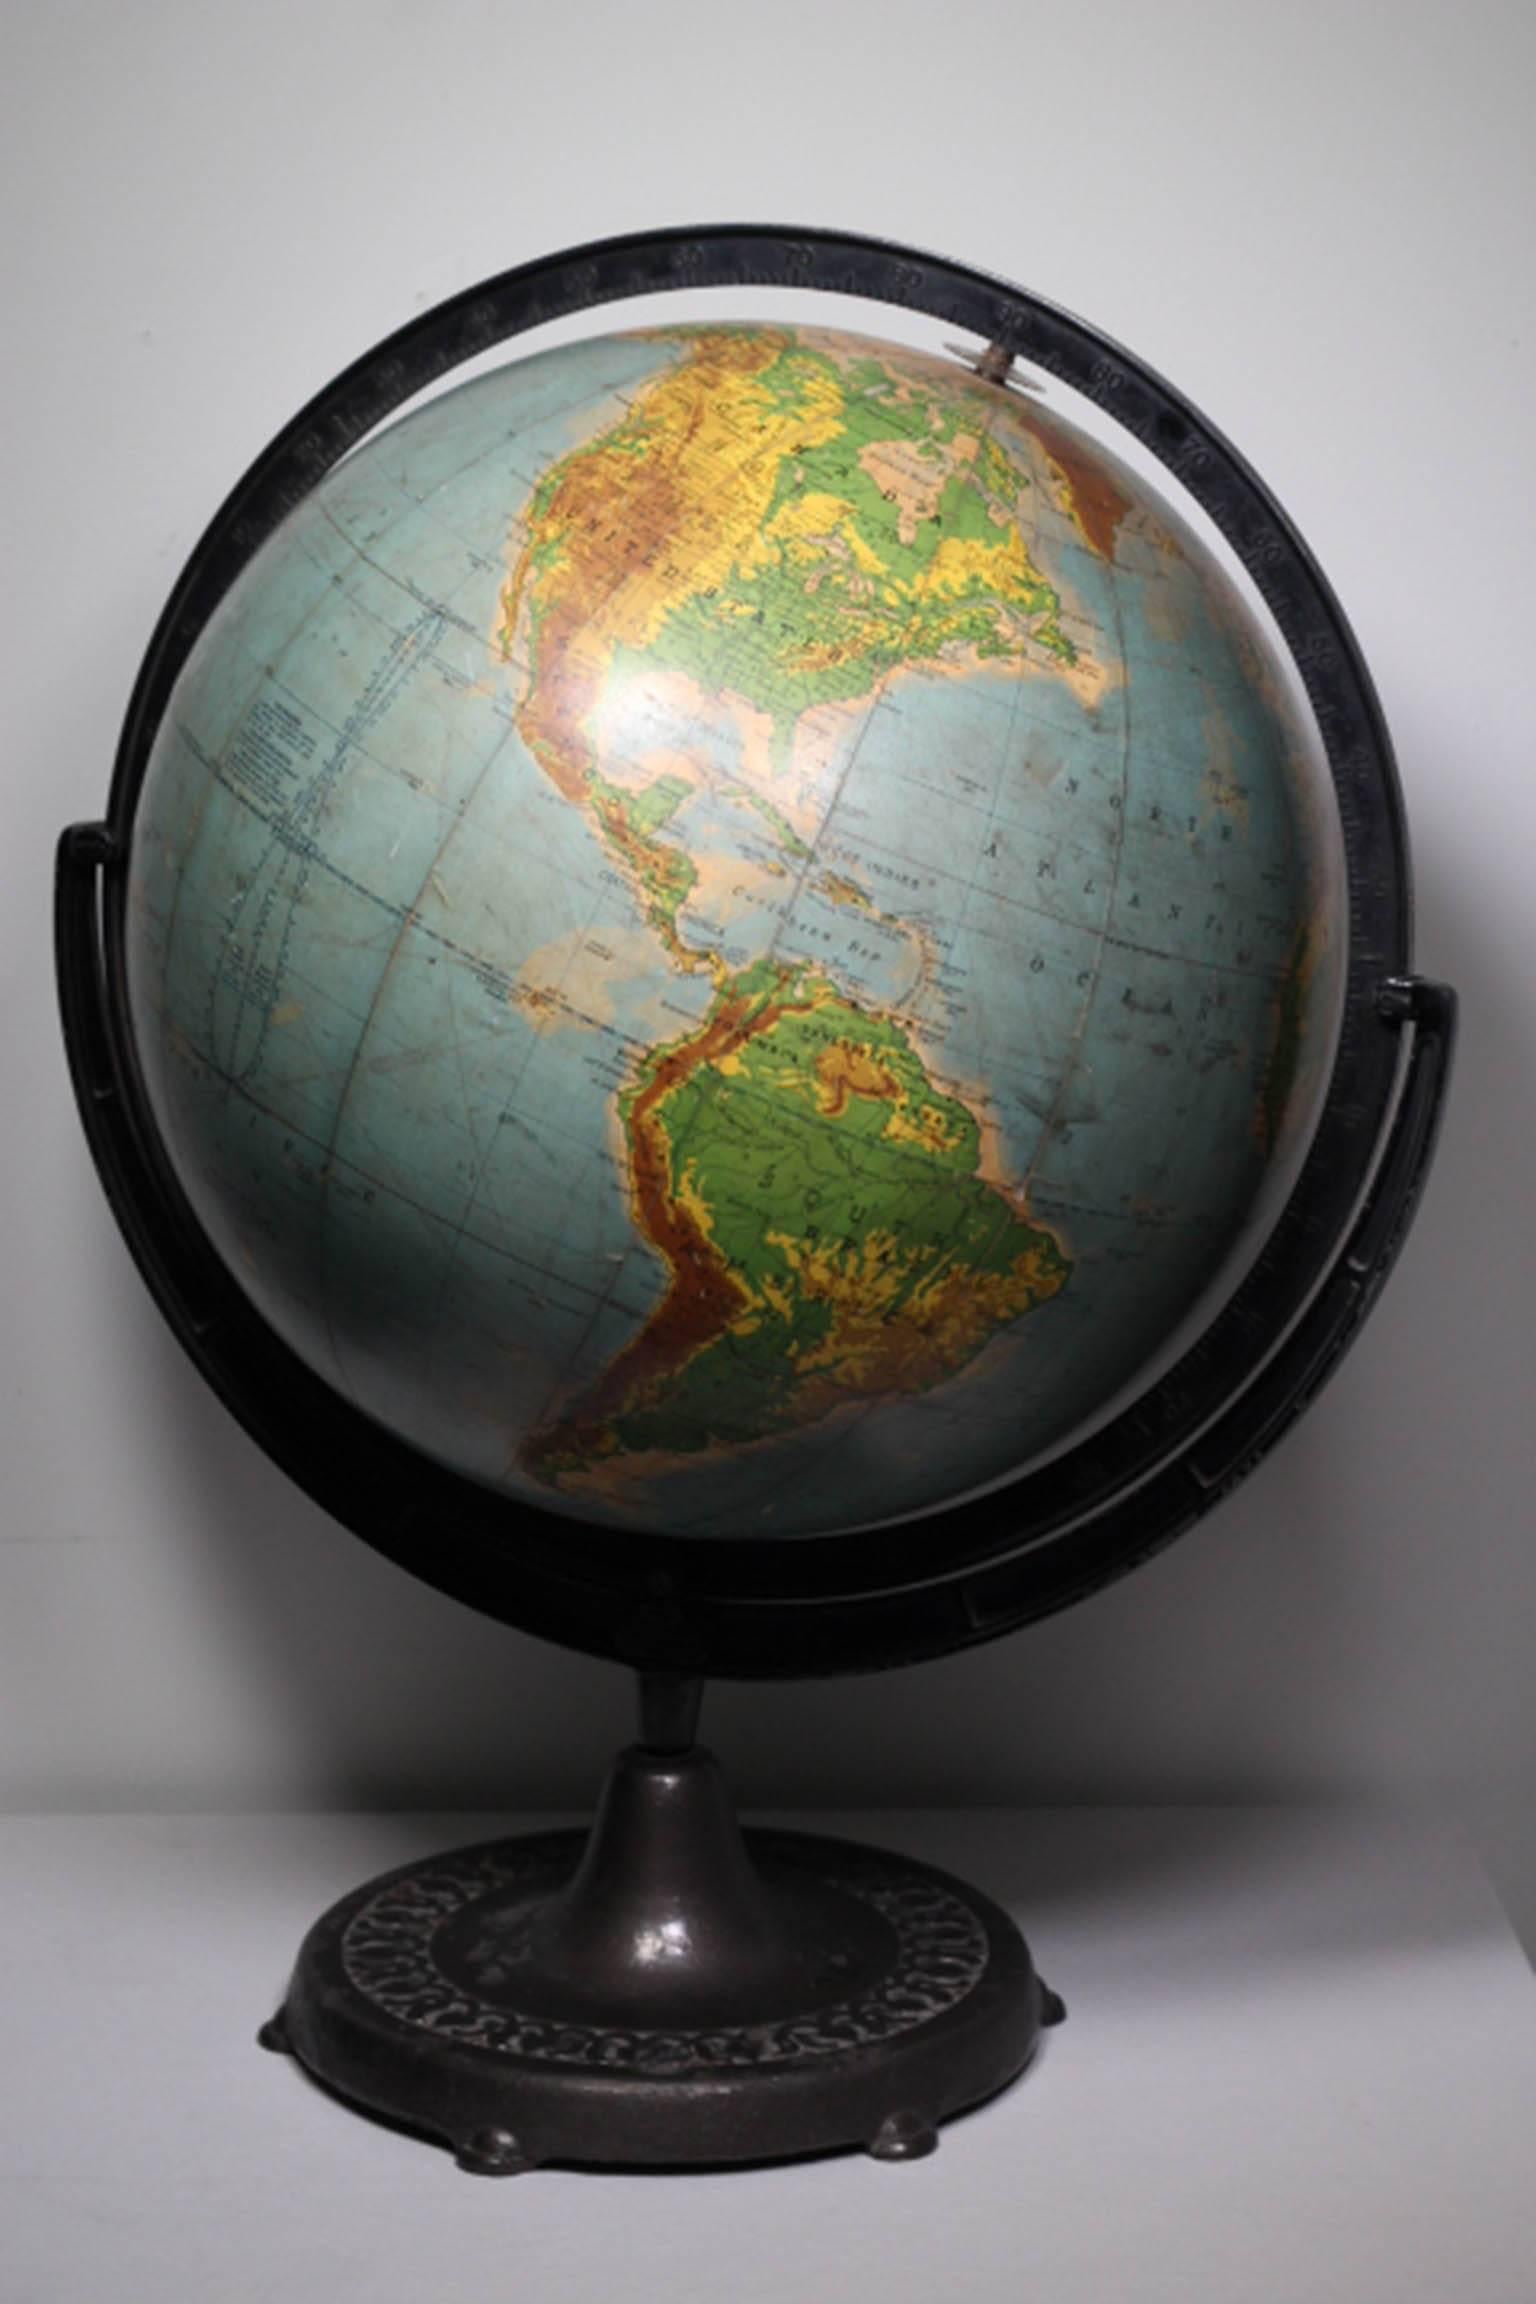 Monumental Rand McNally globe with a cast iron base and bracket. The globe rotates on the bracket. The globe appears to be either glass or metal under the paper map covering.